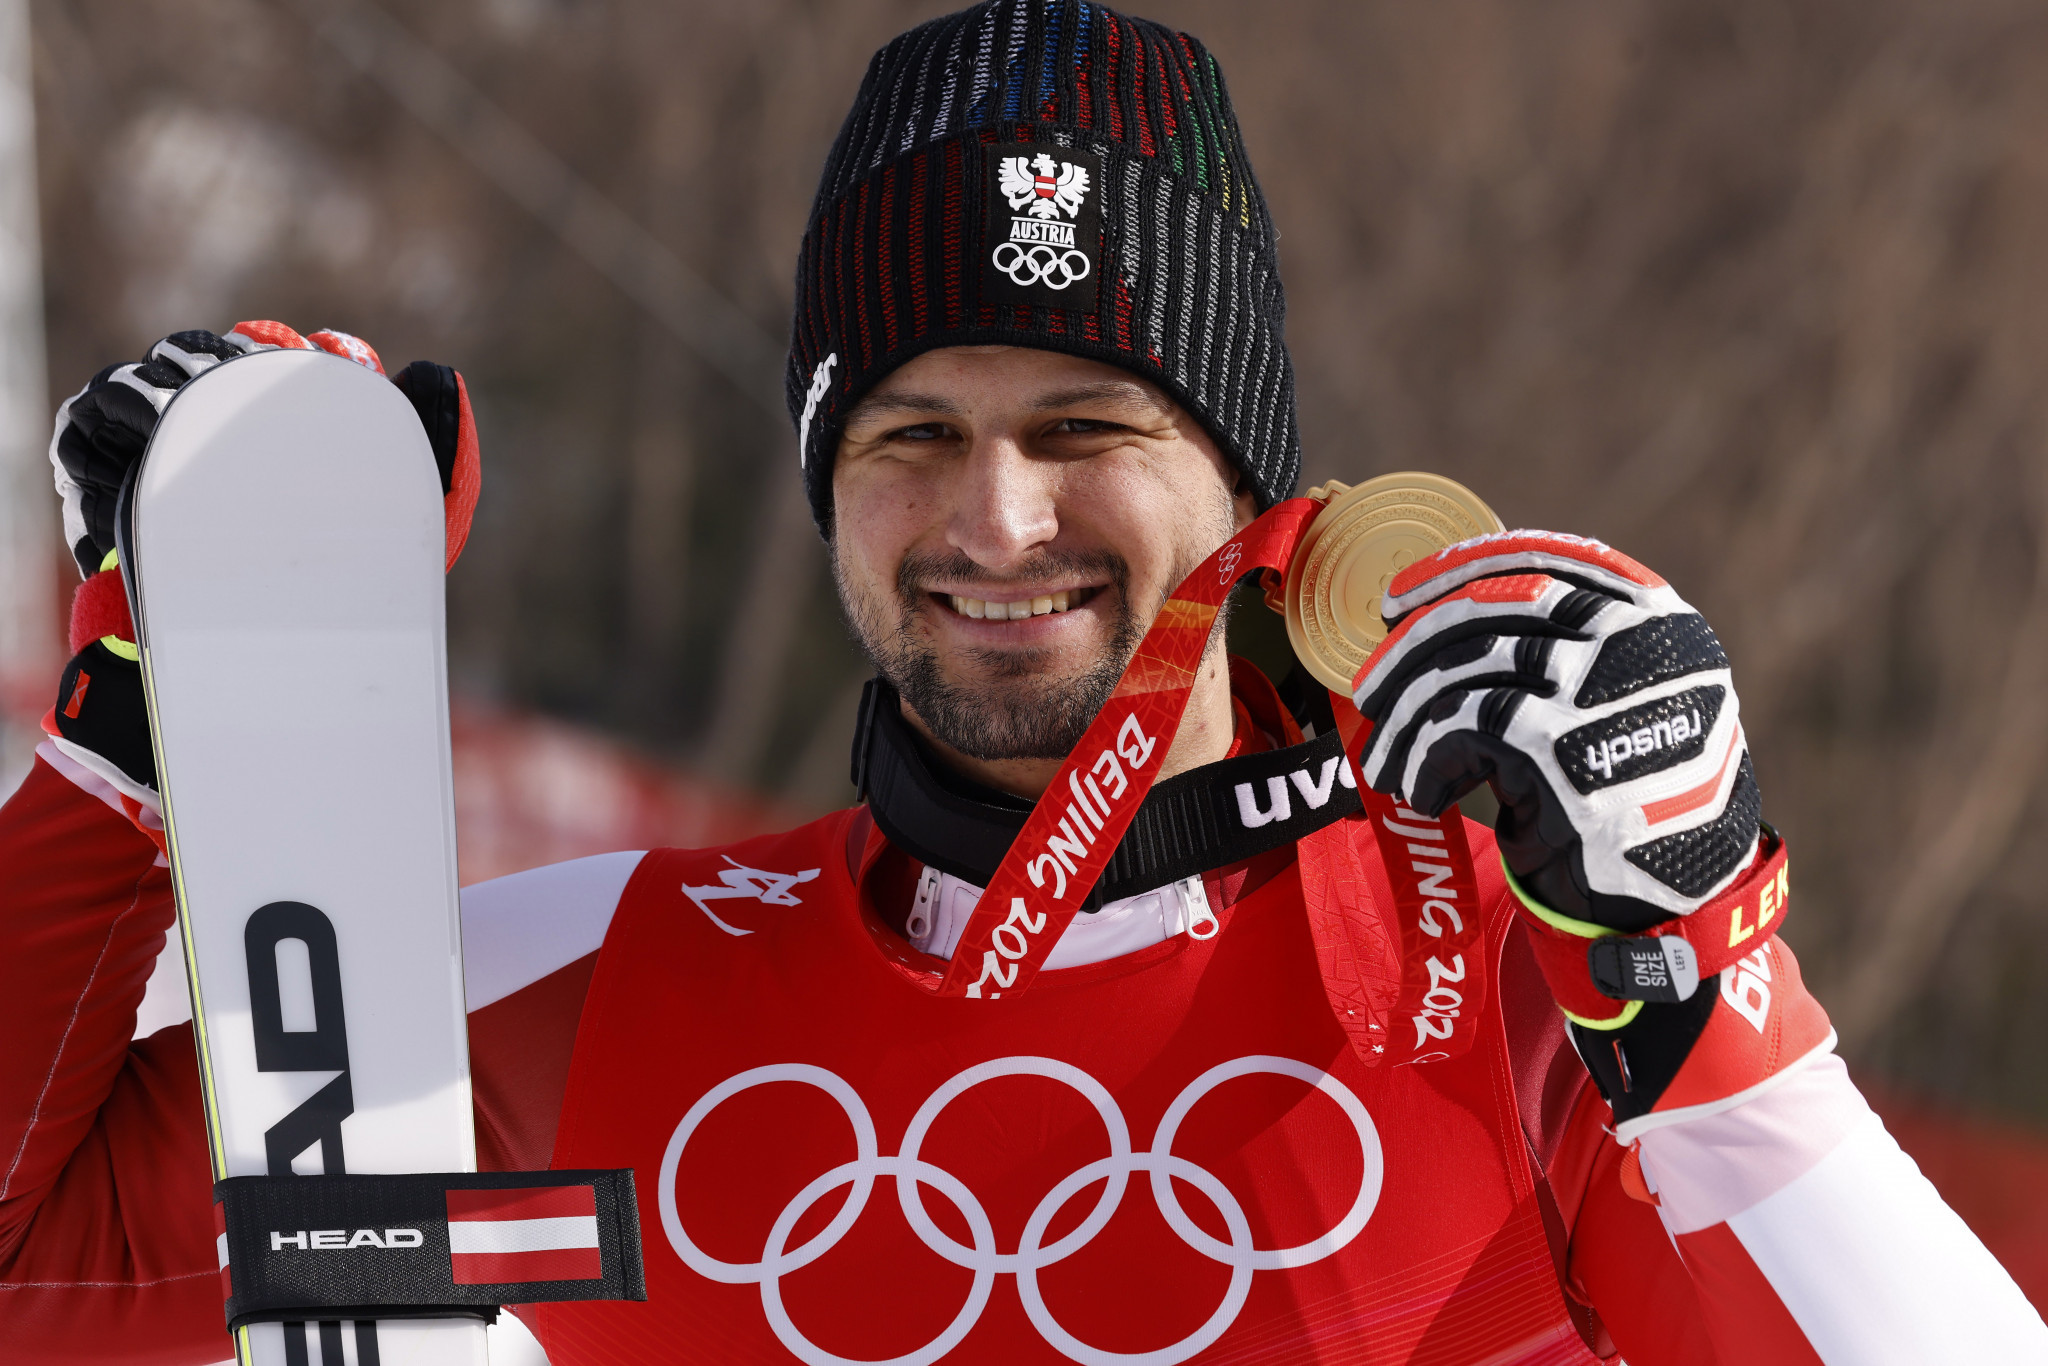 Johannes Strolz of Austria claimed gold in Alpine combined today, 34 years after his father ©Getty Images